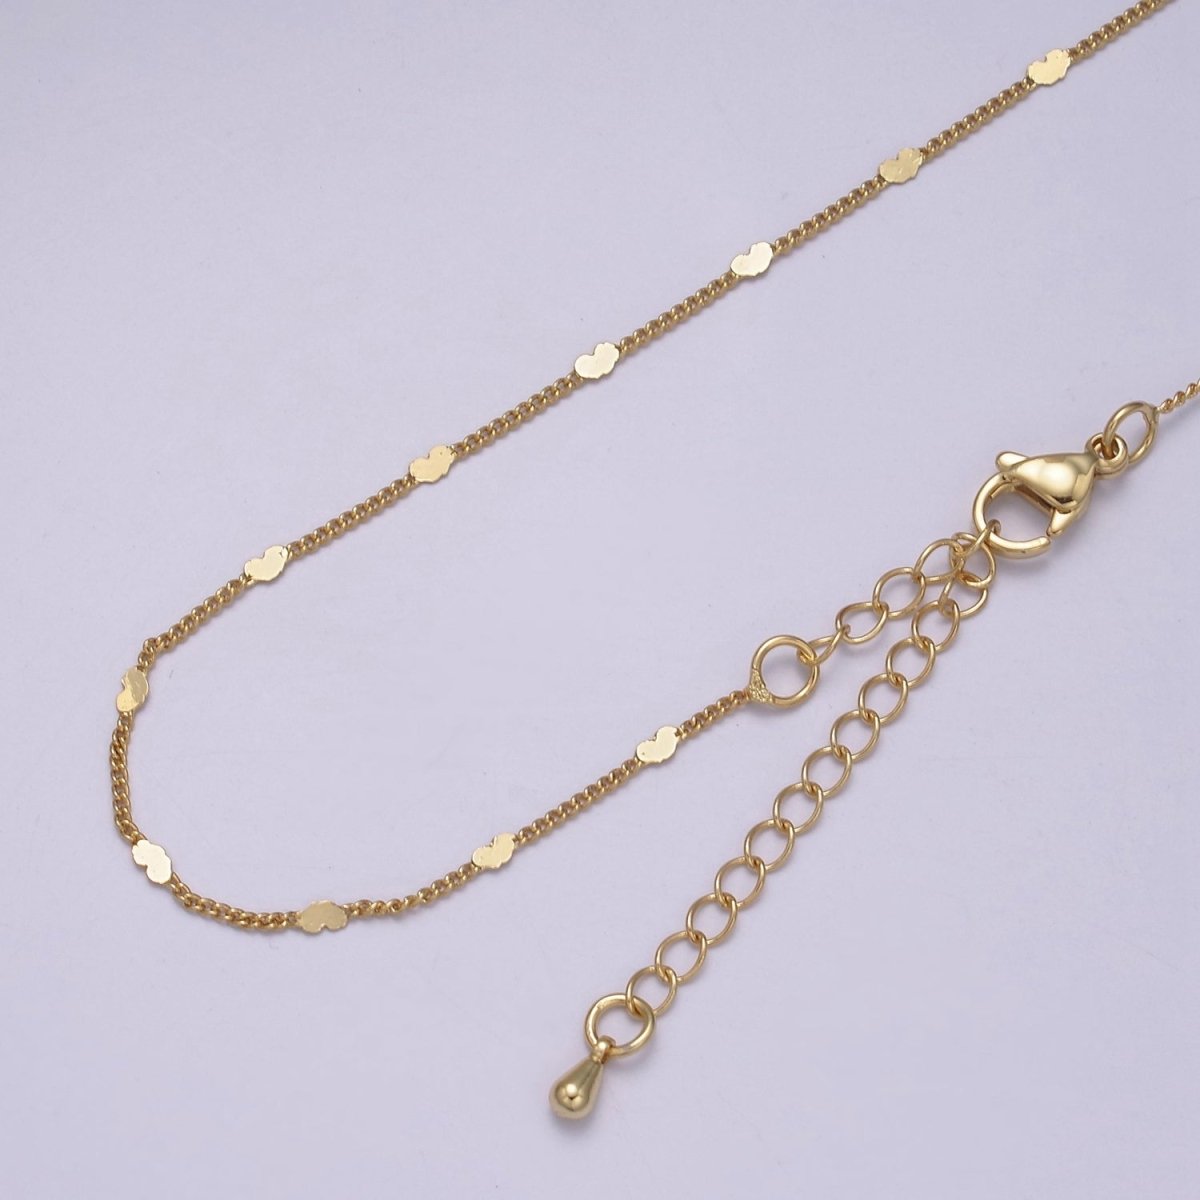 Tiny Heart Necklace in Gold Disc Satellite Chain 24k Gold Filled Curb Chain Dainty Necklace | WA-872 - DLUXCA